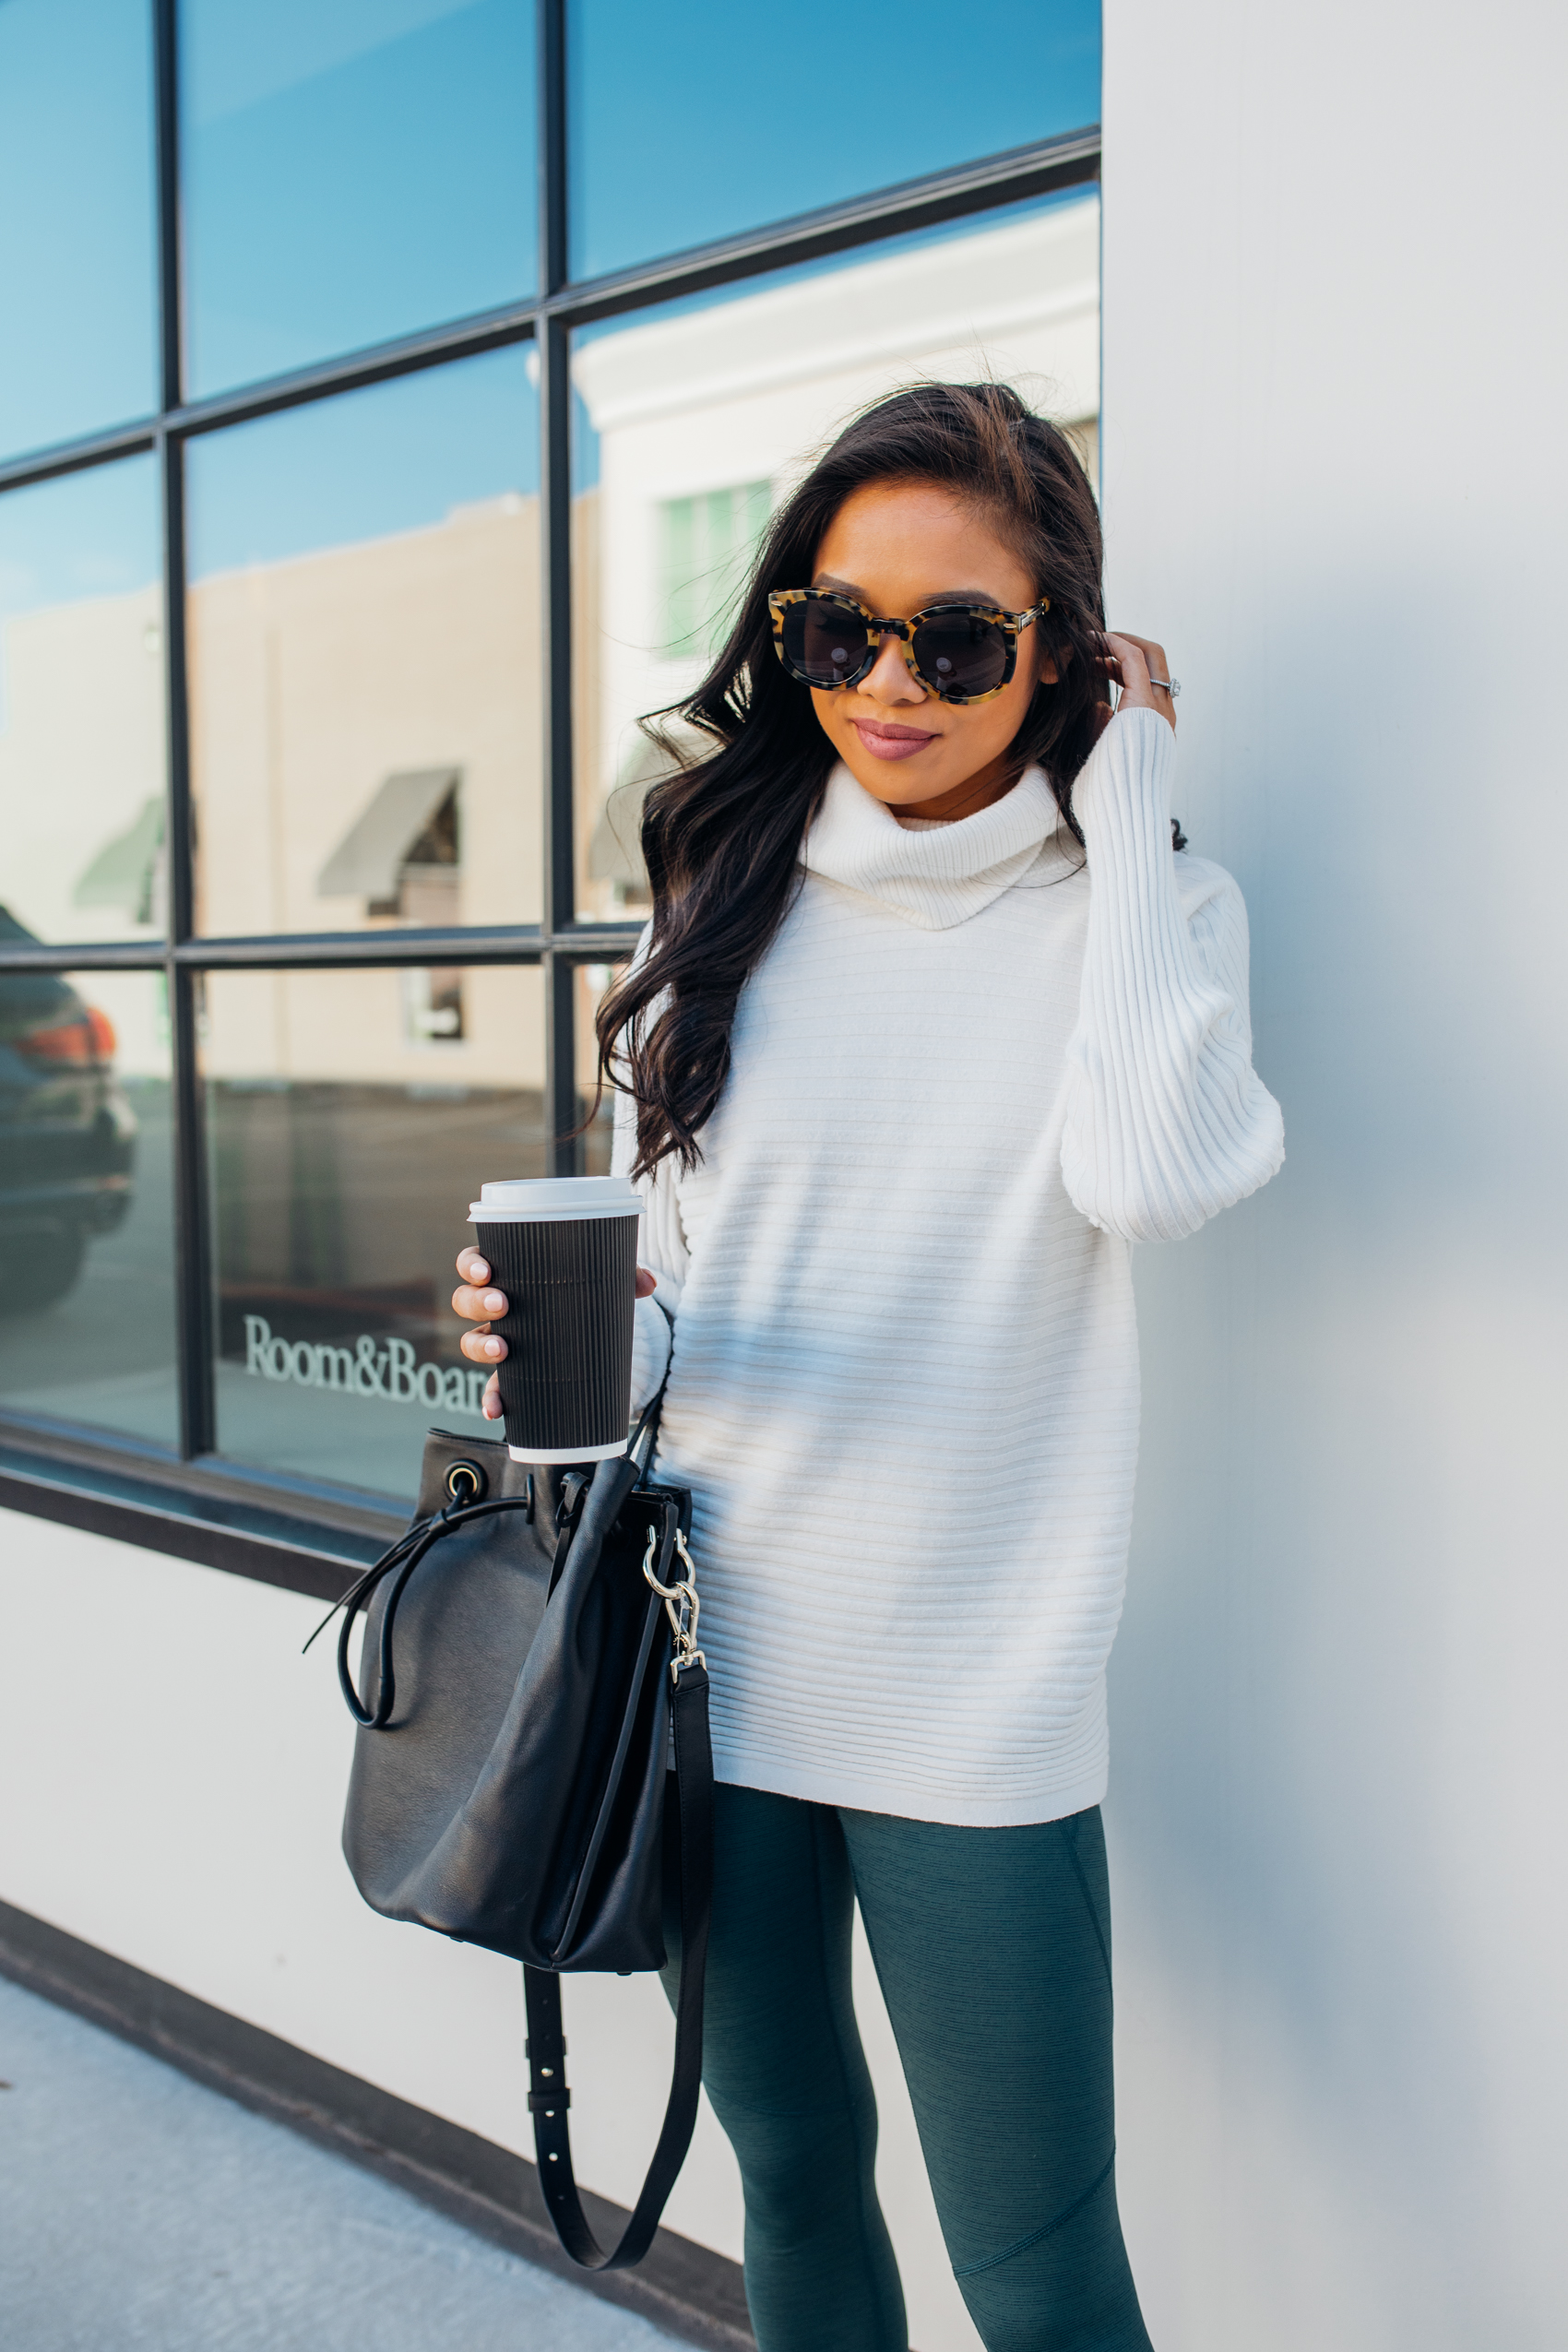 Asian woman wearing white turtleneck ribbed sweater with outdoor voices cole haan grand ambition bag karen walker super duper strength sunglasses dallas fashion blogger Hoang-Kim Cung